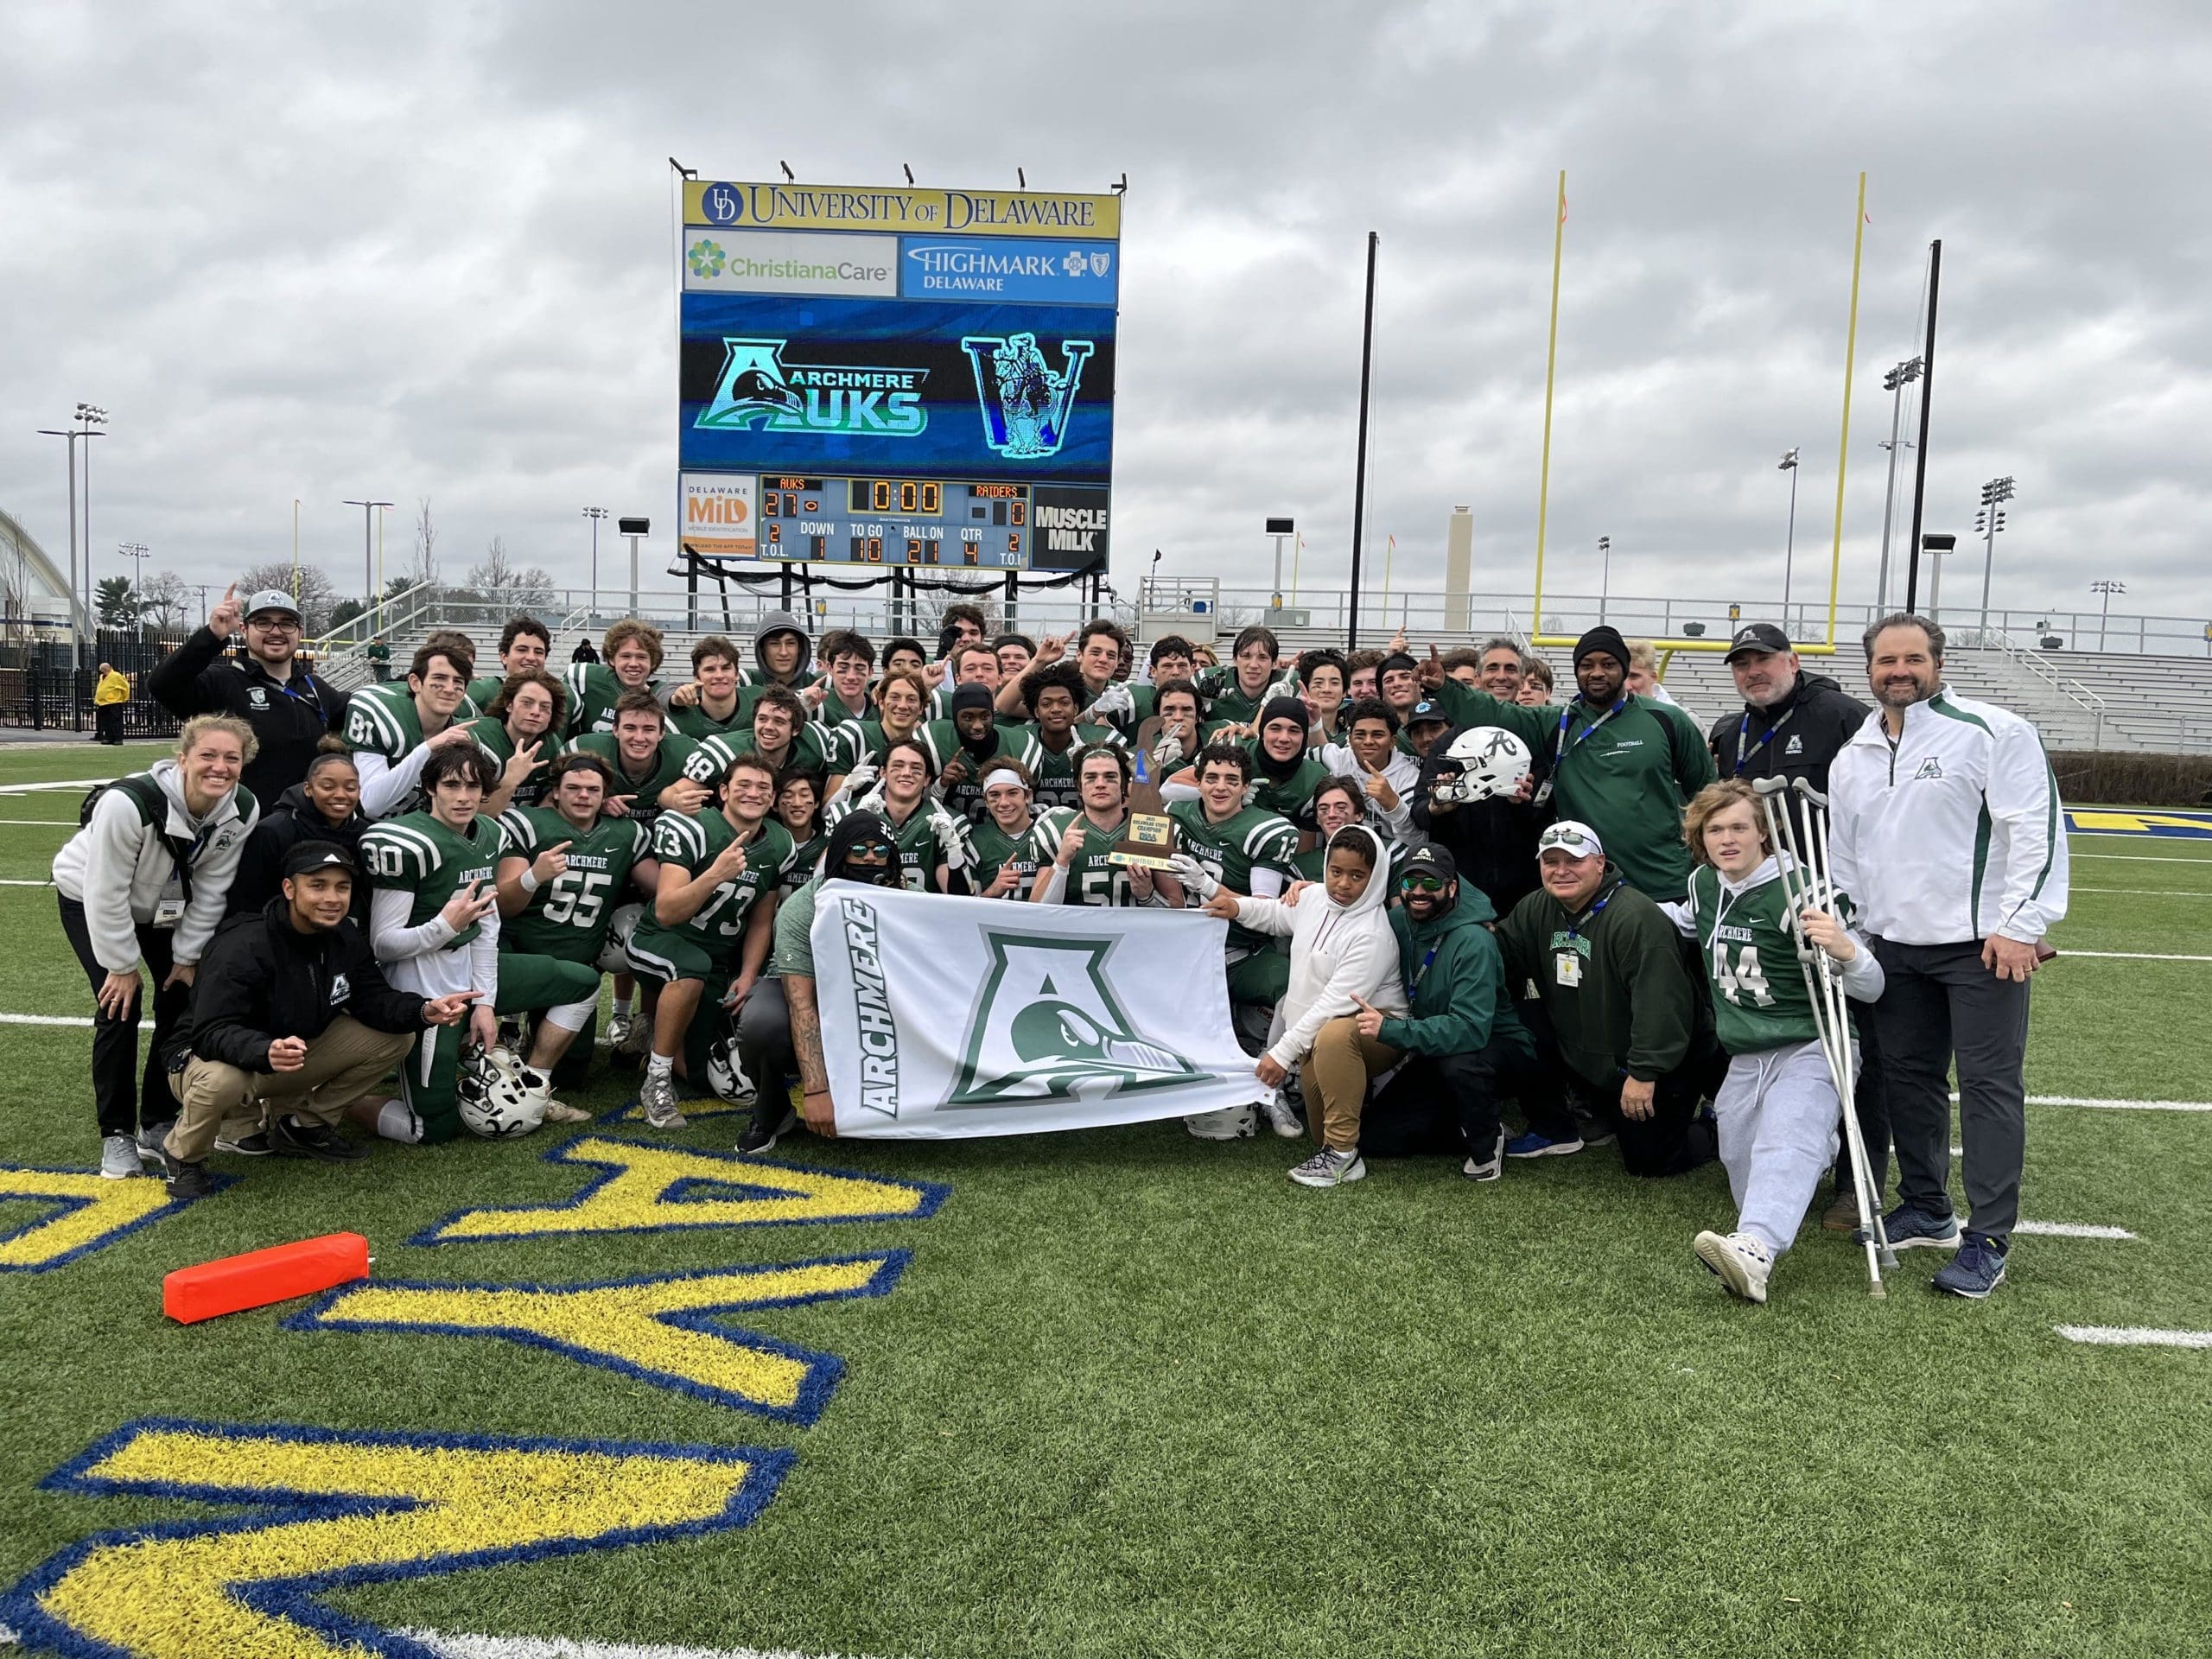 Featured image for “Archmere wins big in first ever 2A state championship”